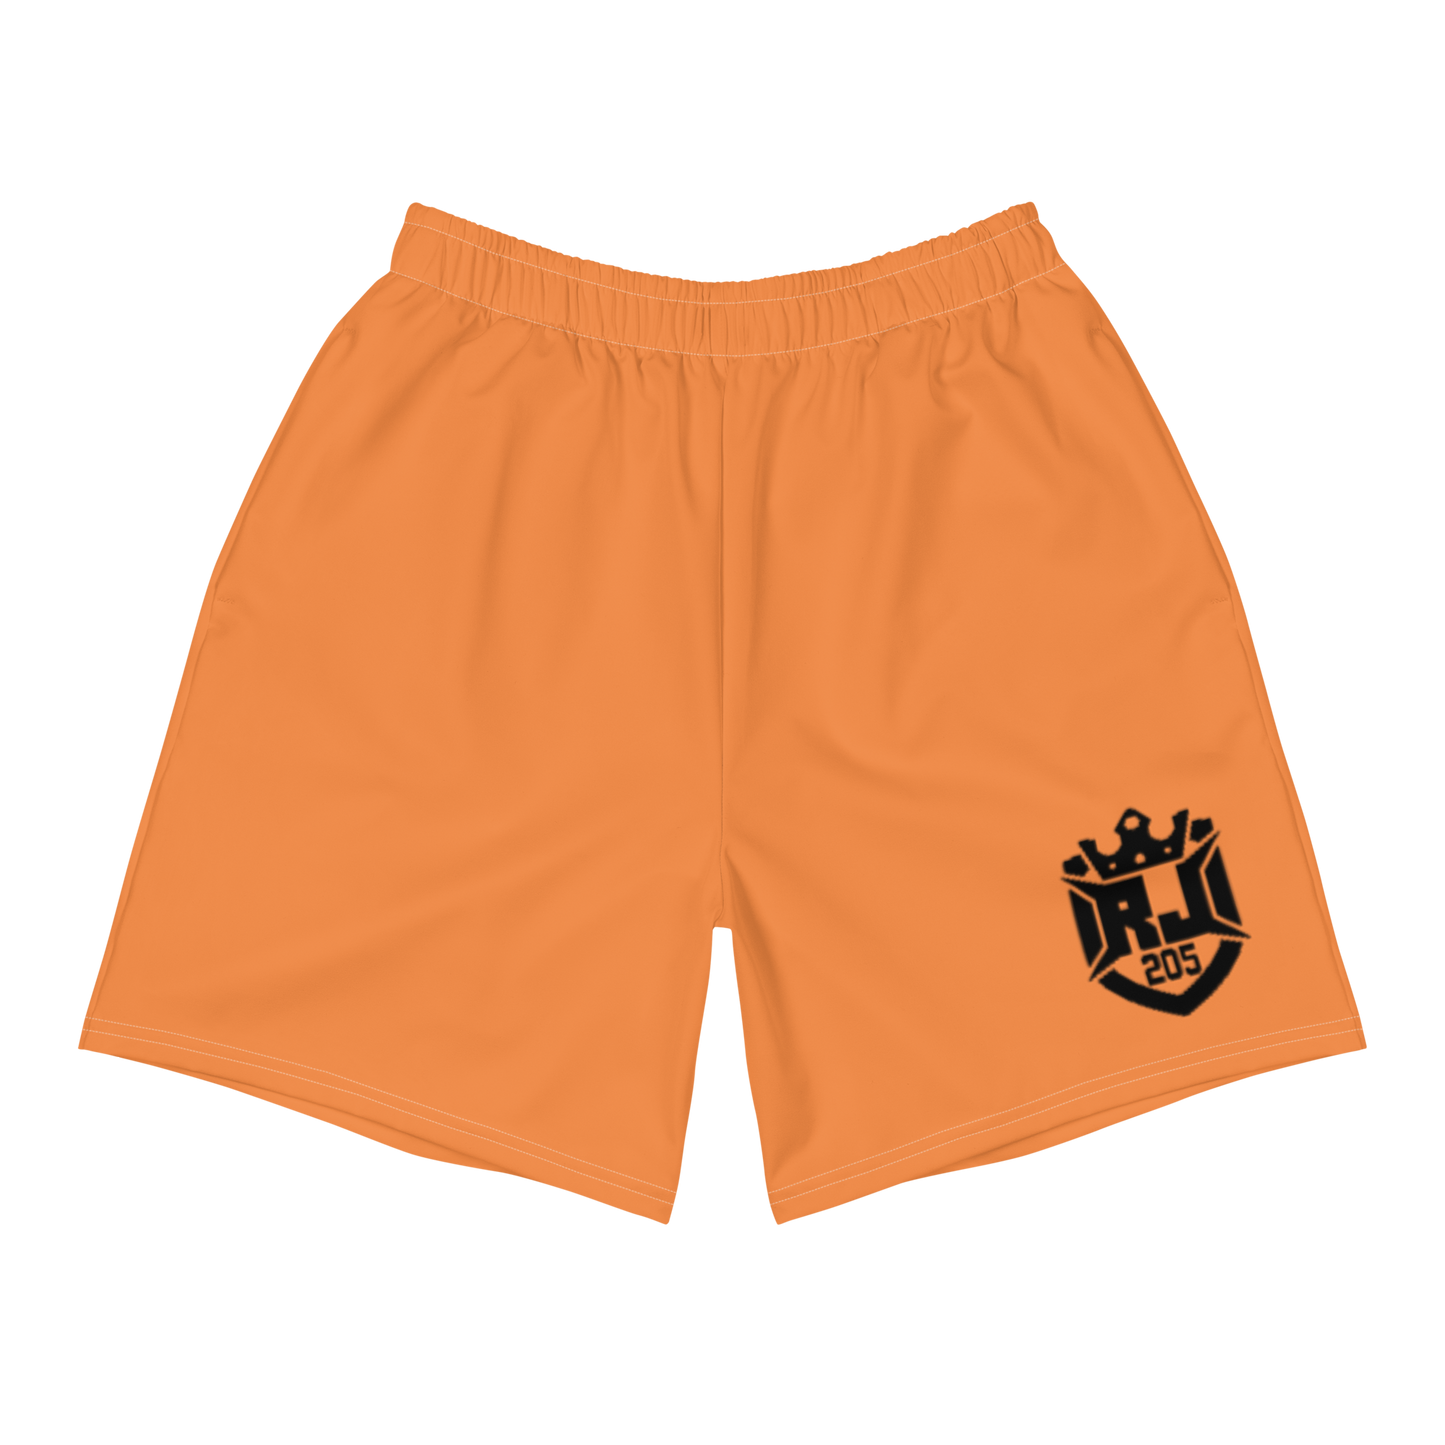 RJ PERRY GAMEDAY ATHLETIC SHORTS